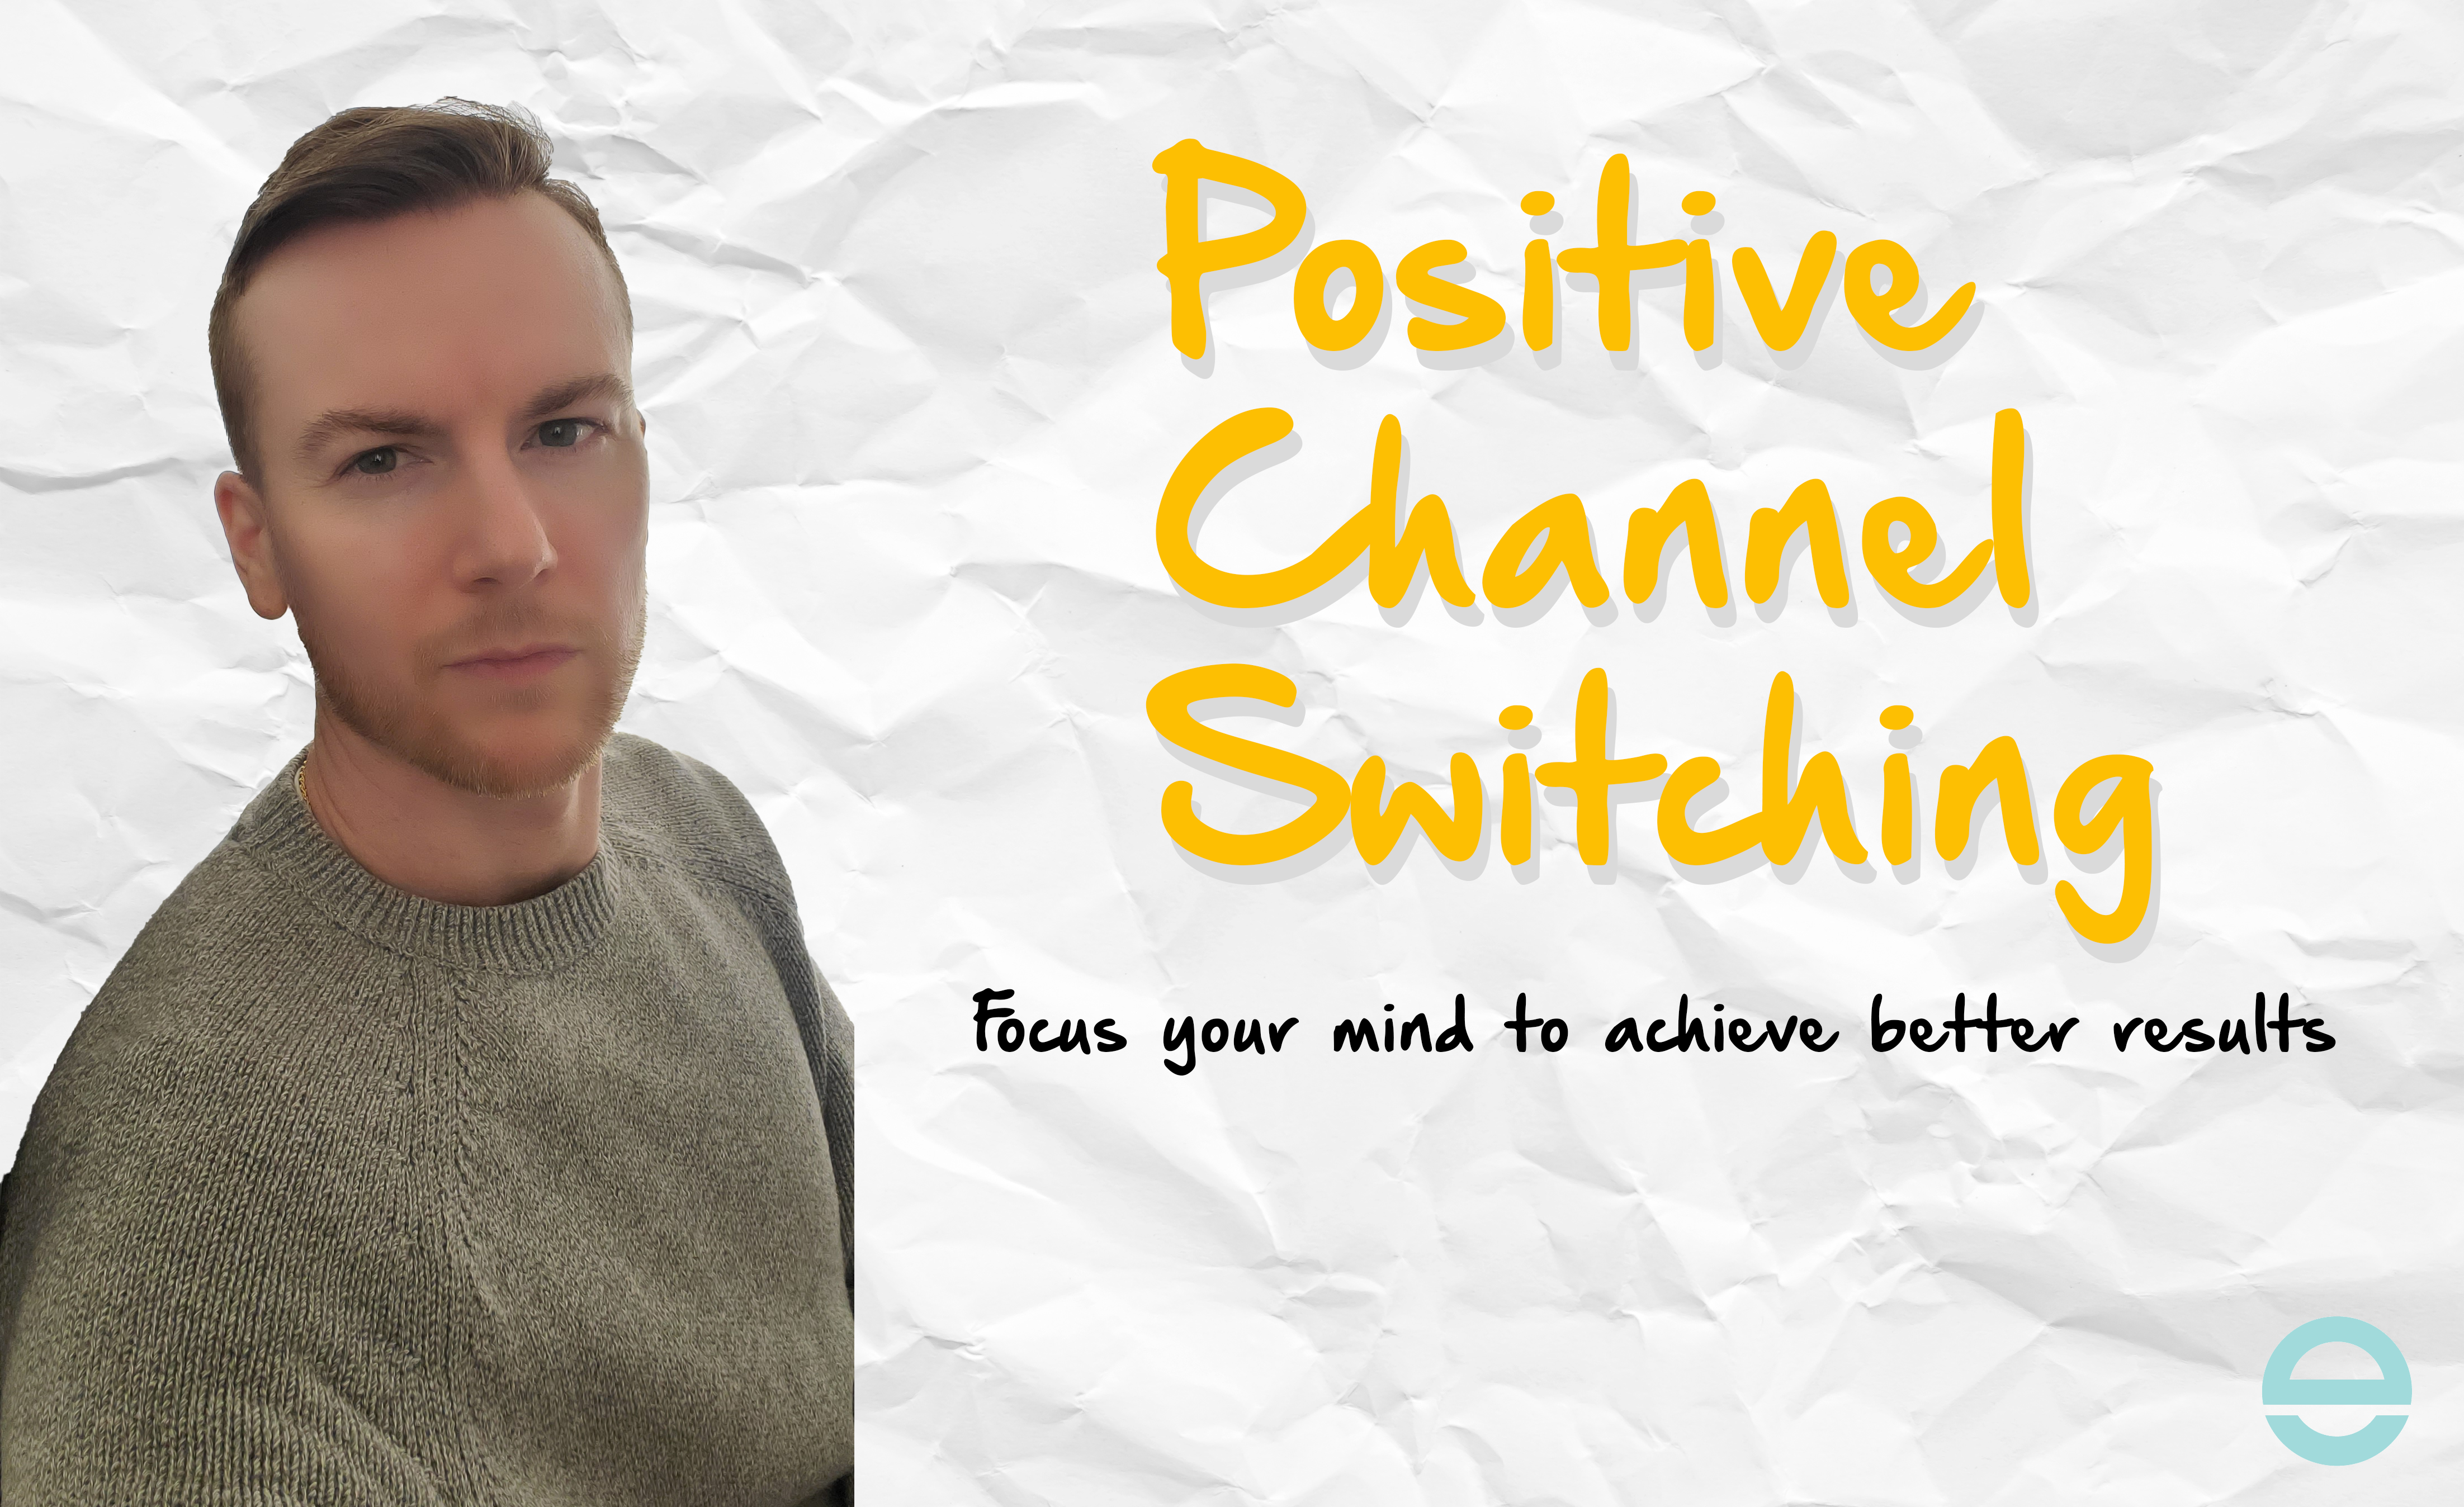 Positive Channel Switching